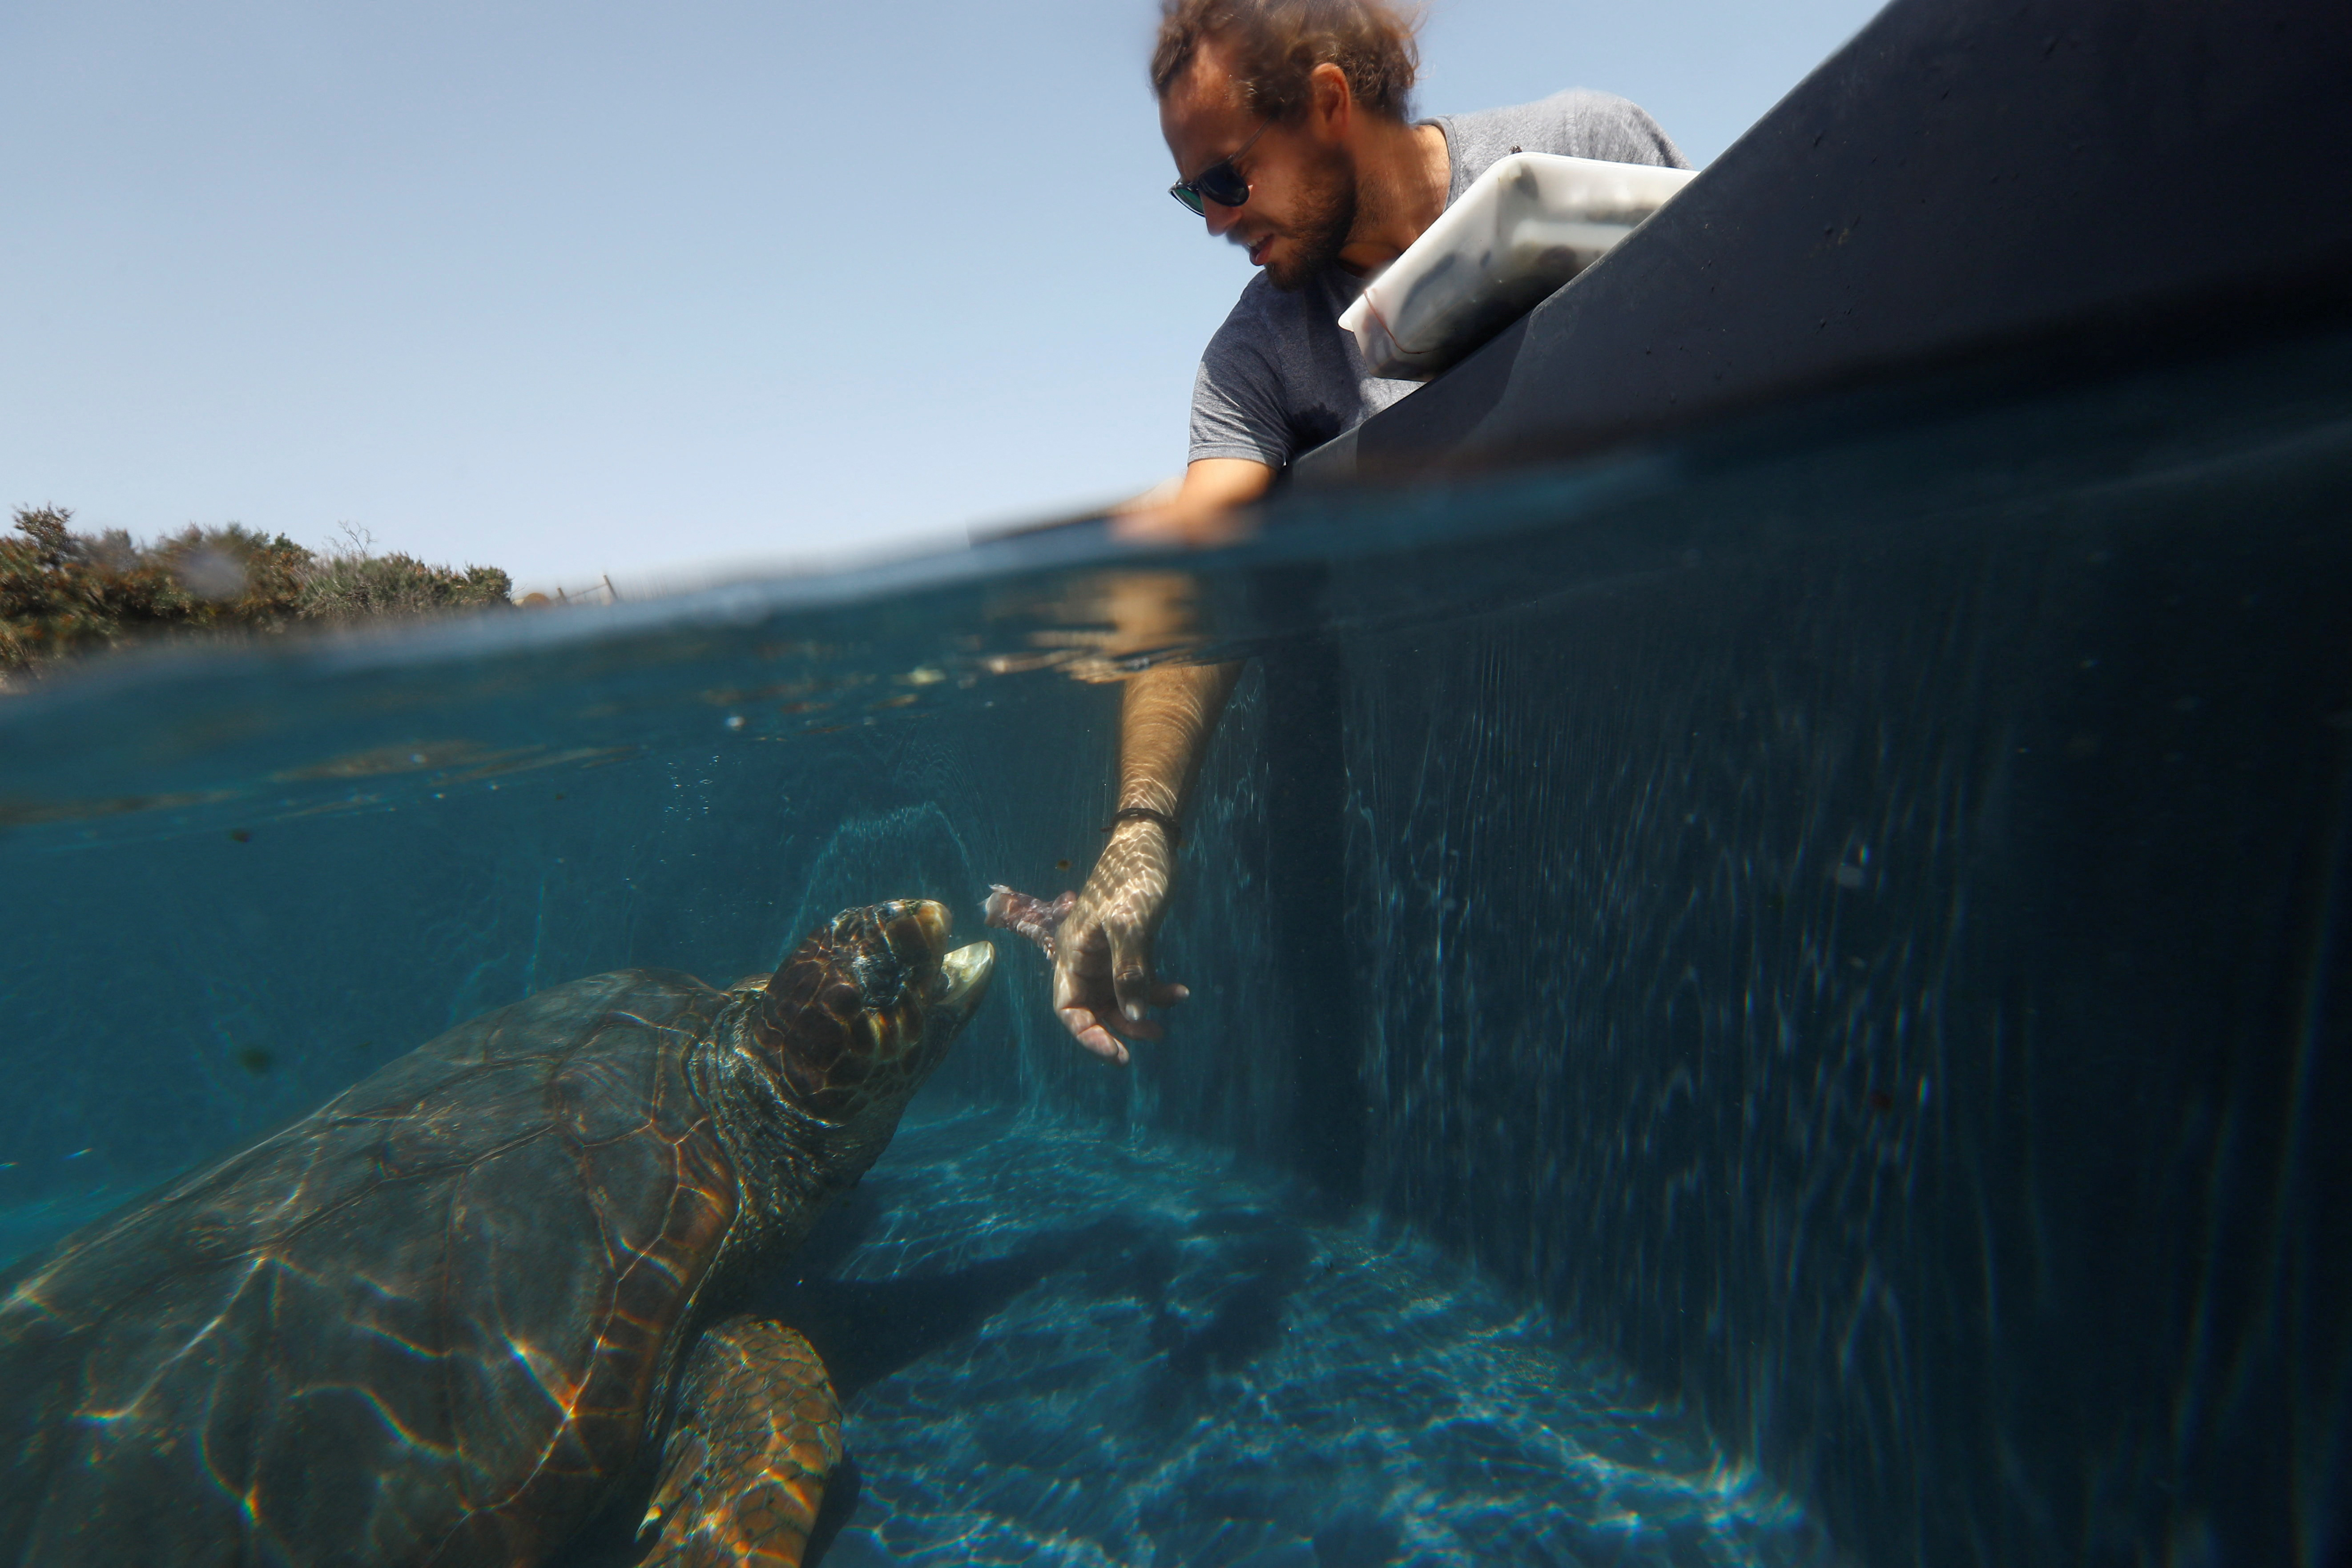 Marine biologist Alejandro Usategui feeds a Caretta Caretta turtle in its pond at the Taliarte Wildlife Recovery Center, in the island of Gran Canaria